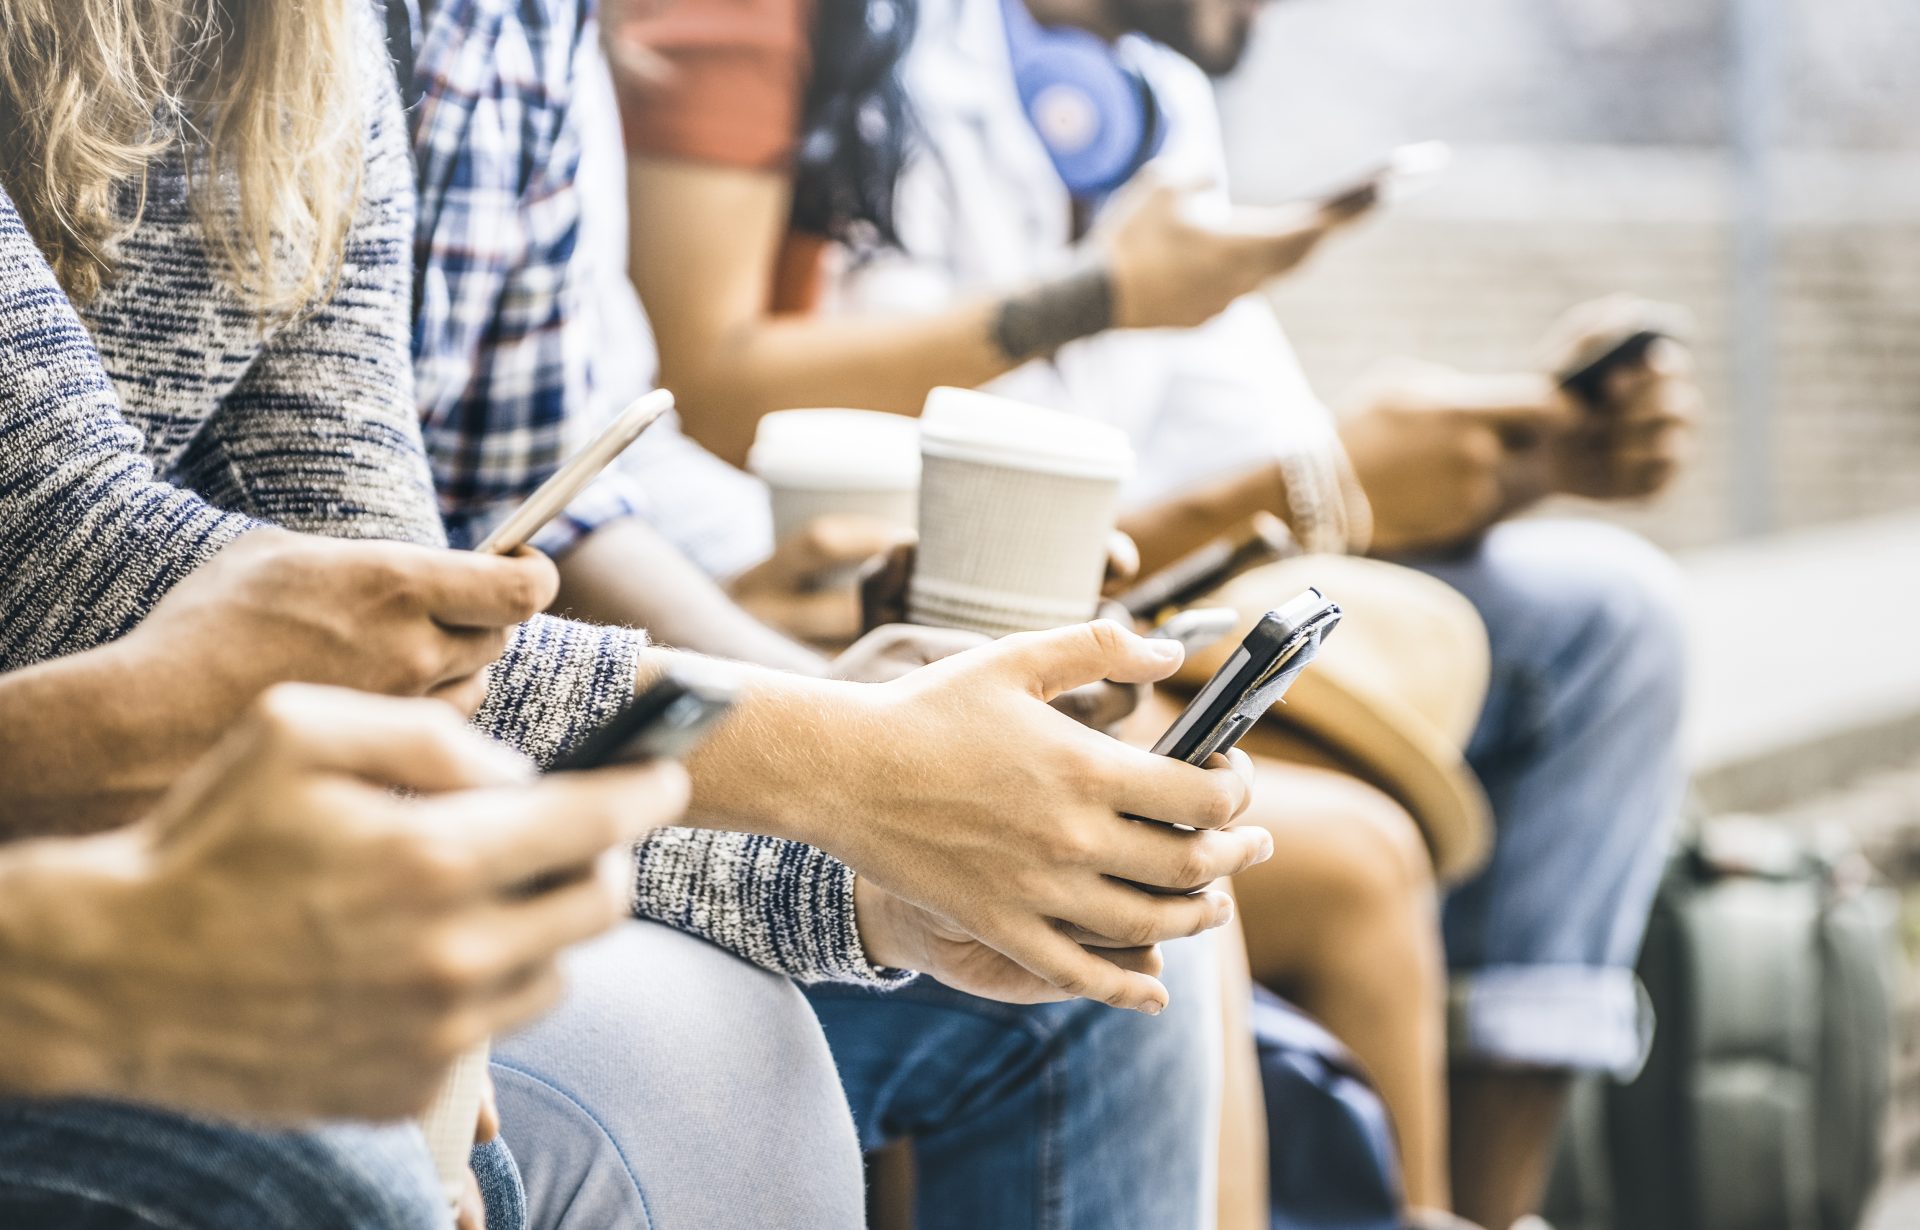 Multicultural friends group using smartphone with coffee at university college break – People hands addicted by mobile smart phone – Technology concept with connected trendy millennials – Filter image